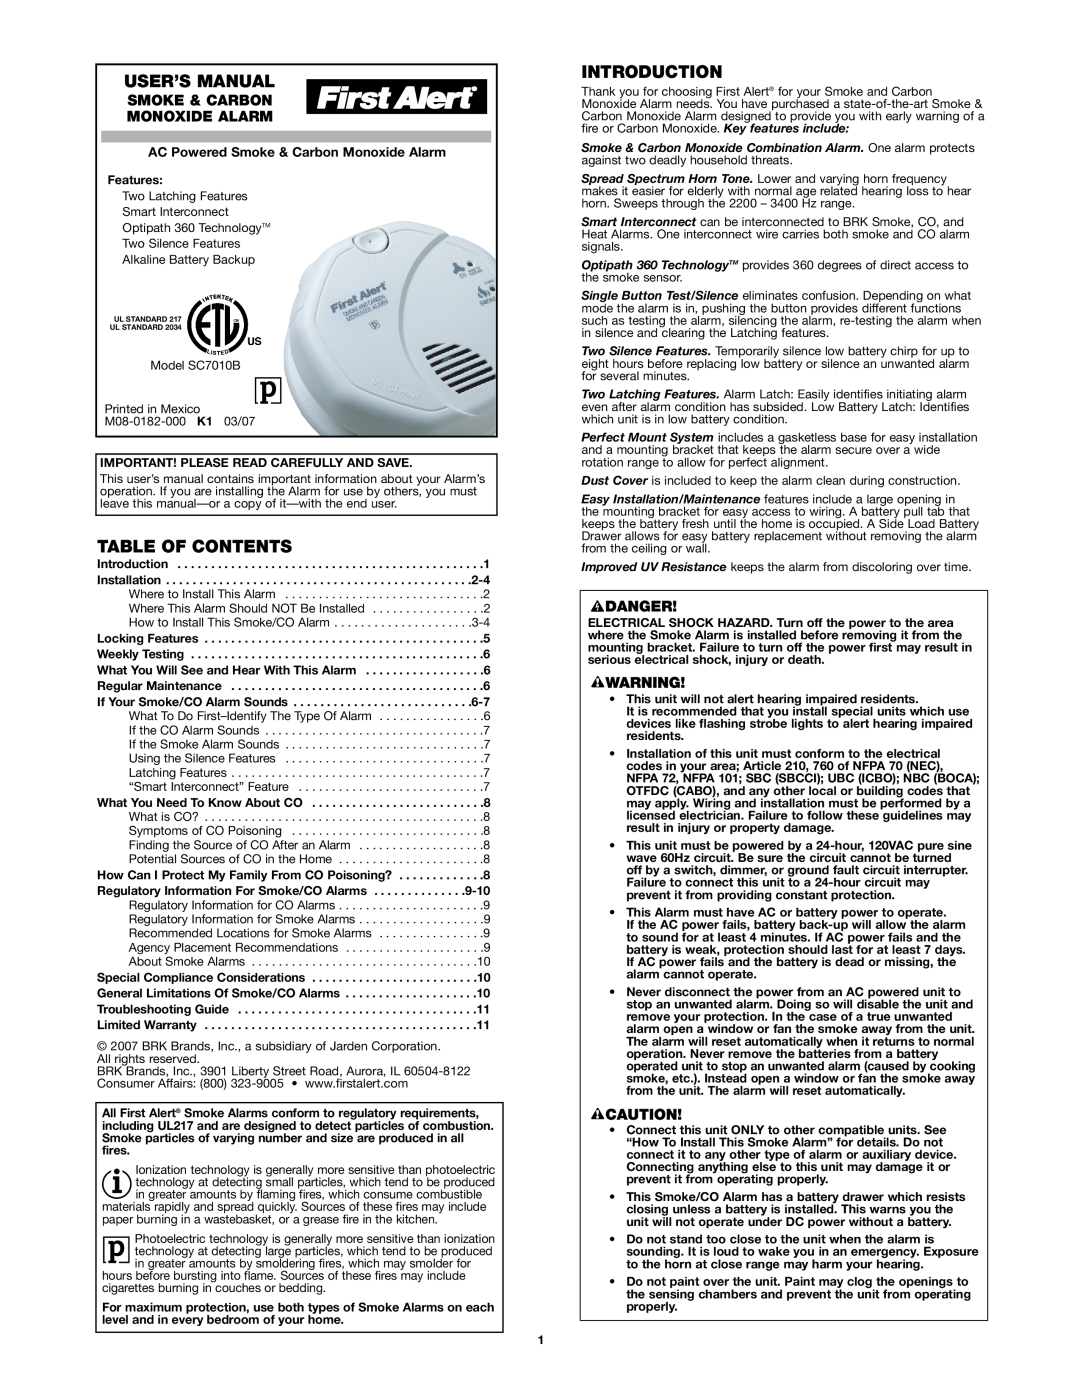 First Alert SC7010B user manual Table Of Contents, Introduction, Smoke & Carbon Monoxide Alarm 